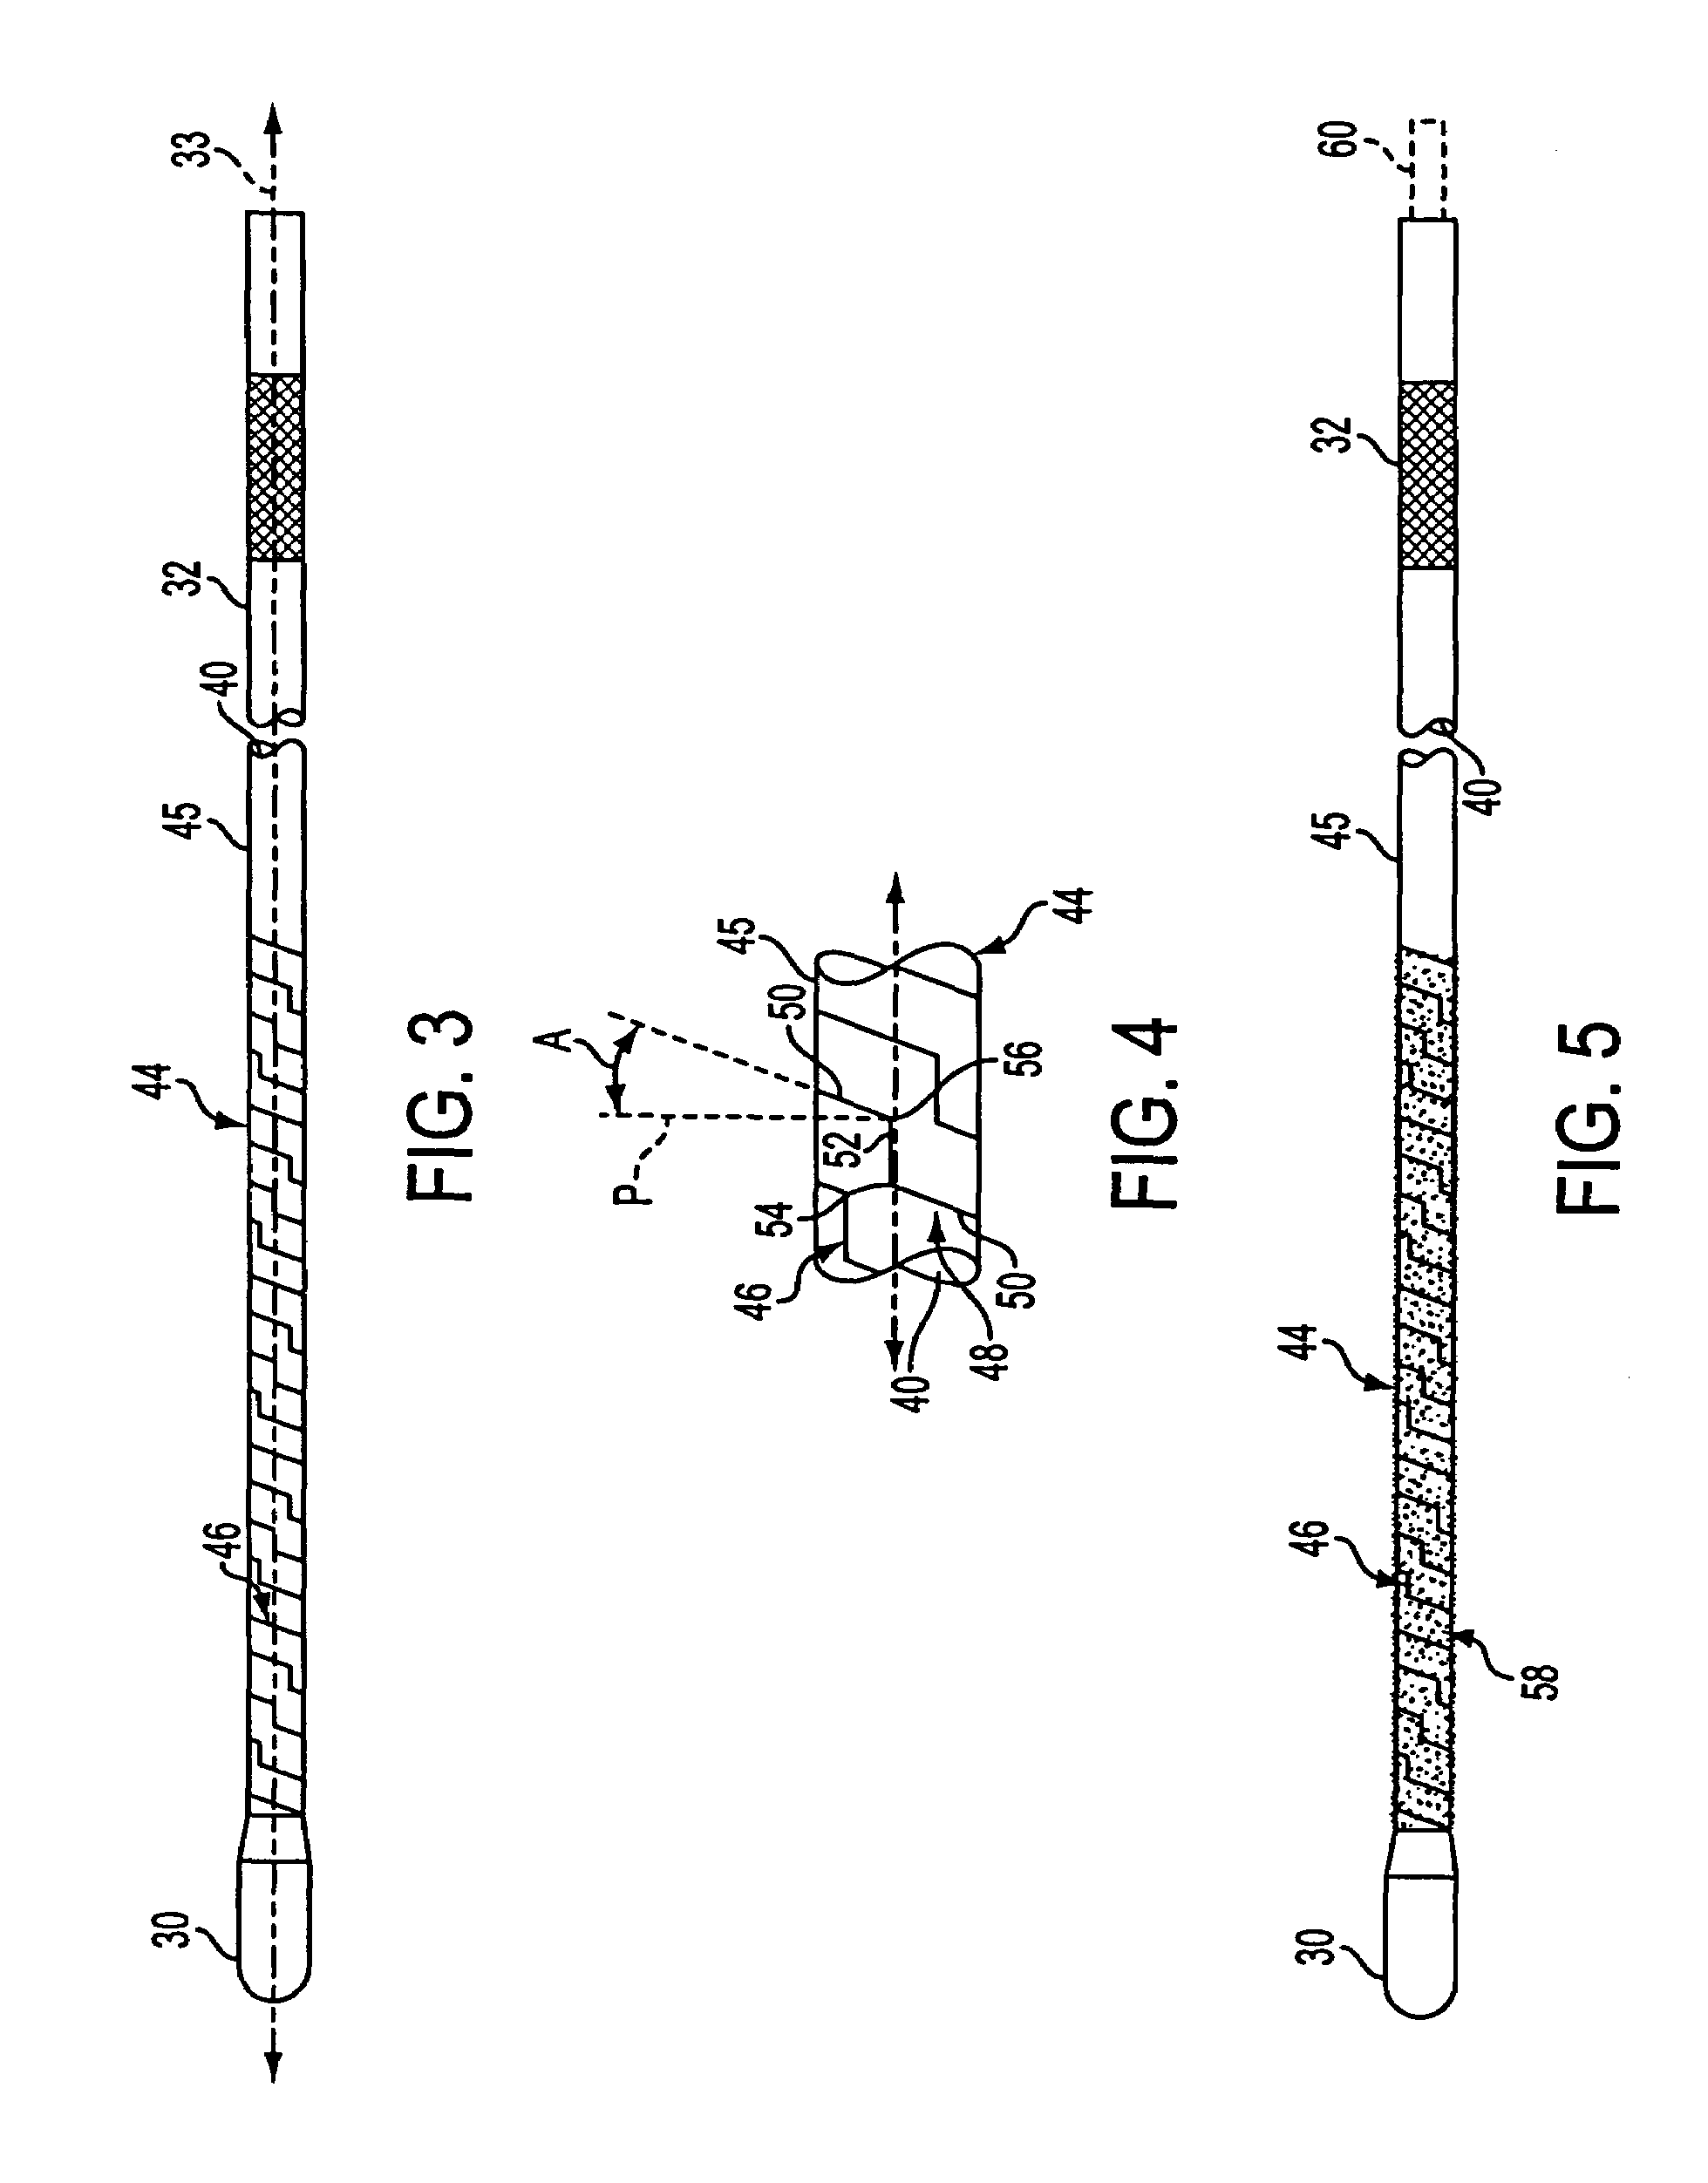 Angled tissue cutting instruments having flexible inner tubular members of tube and sleeve construction